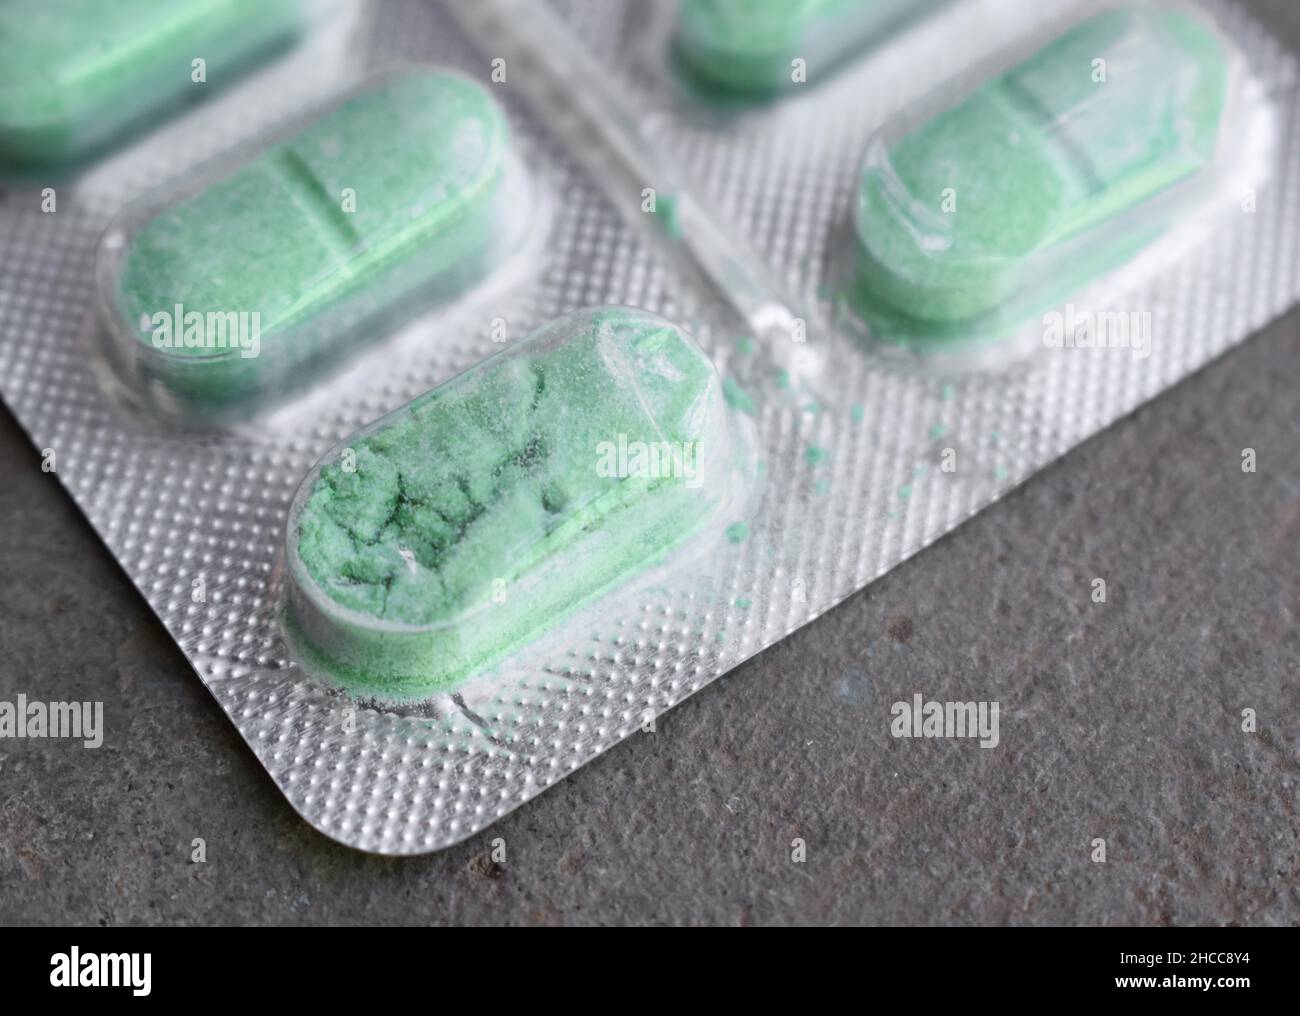 Crushed and damaged tablets in closeup view.  Concept of expired drugs. Stock Photo